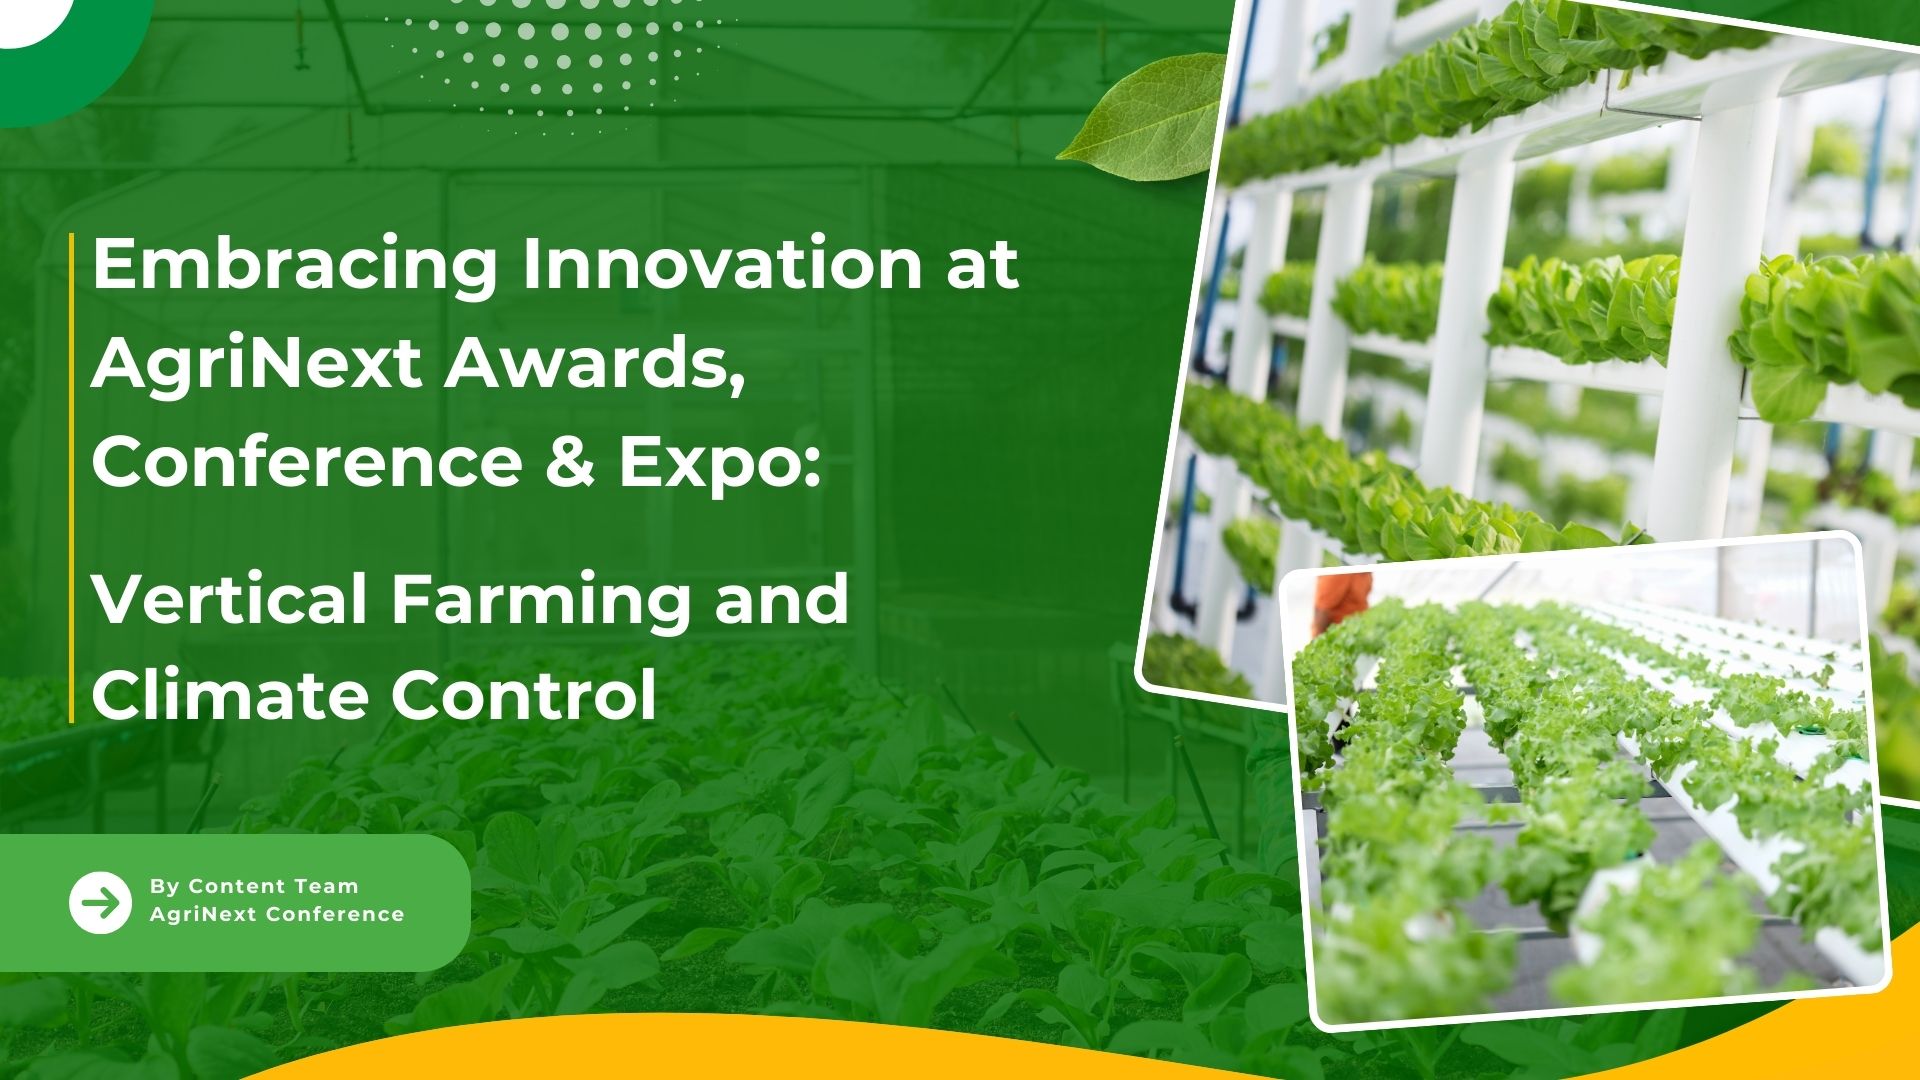 Embracing Innovation at AgriNext Awards,Conference & Expo: Vertical Farming and Climate Control